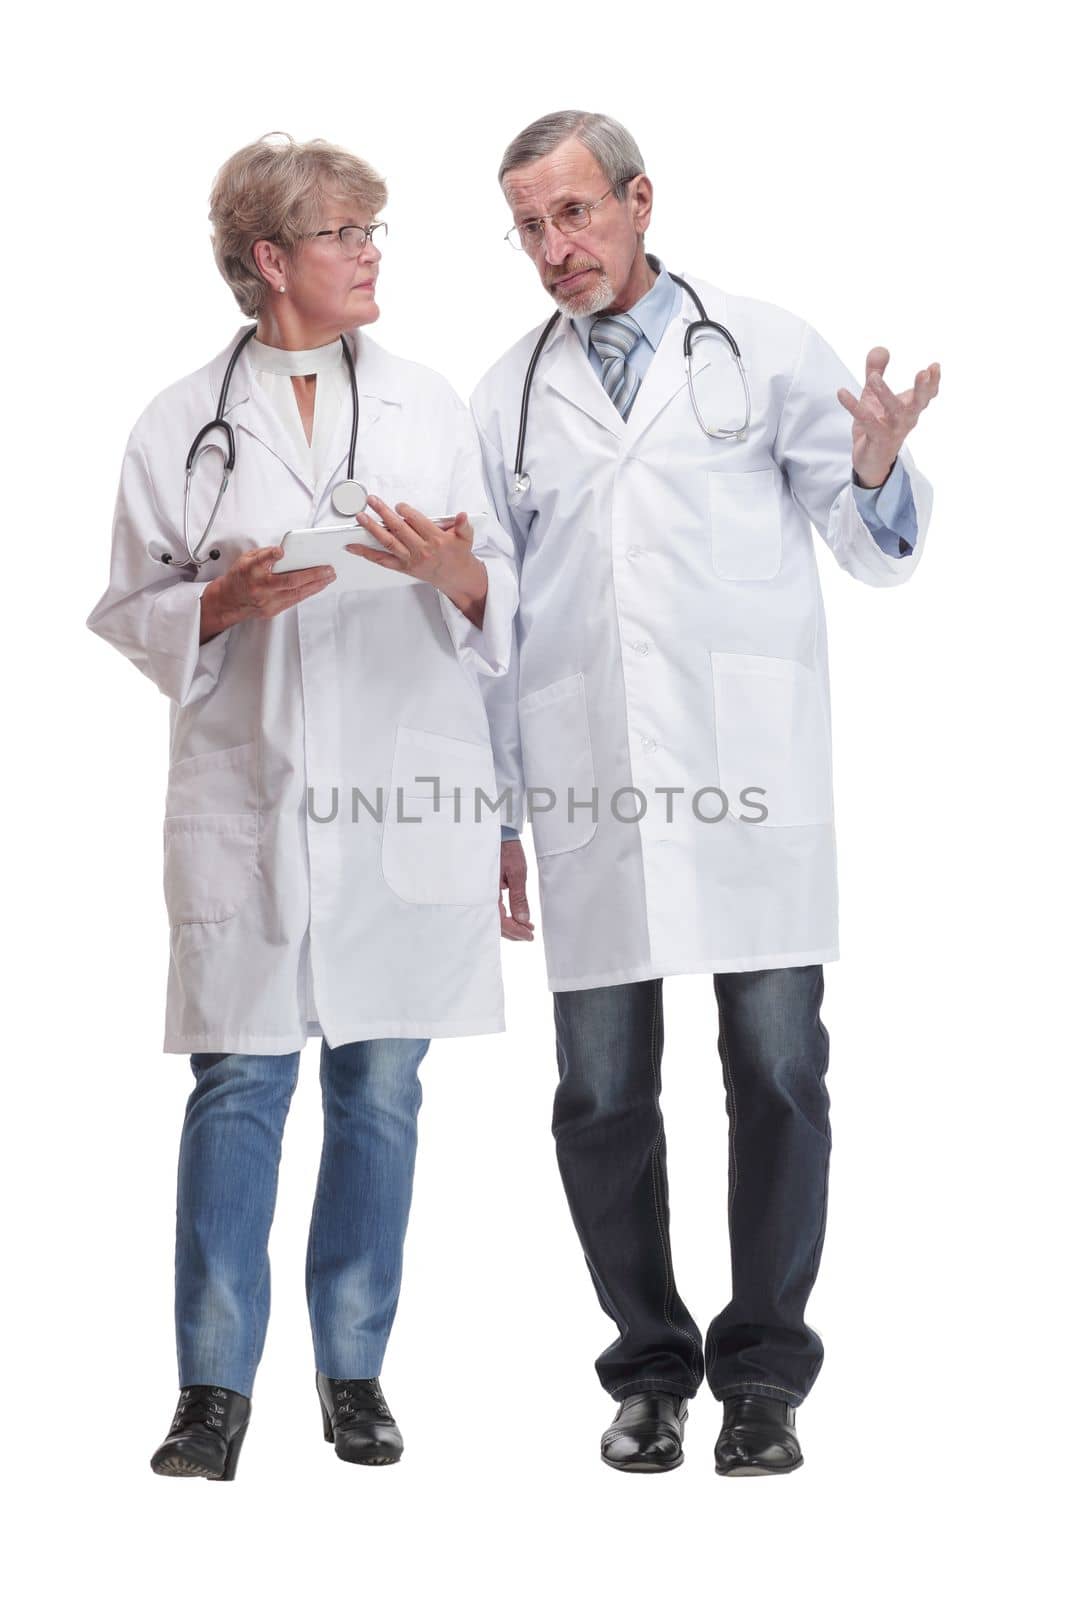 Doctors having a discussion while walking. Concept of medical team